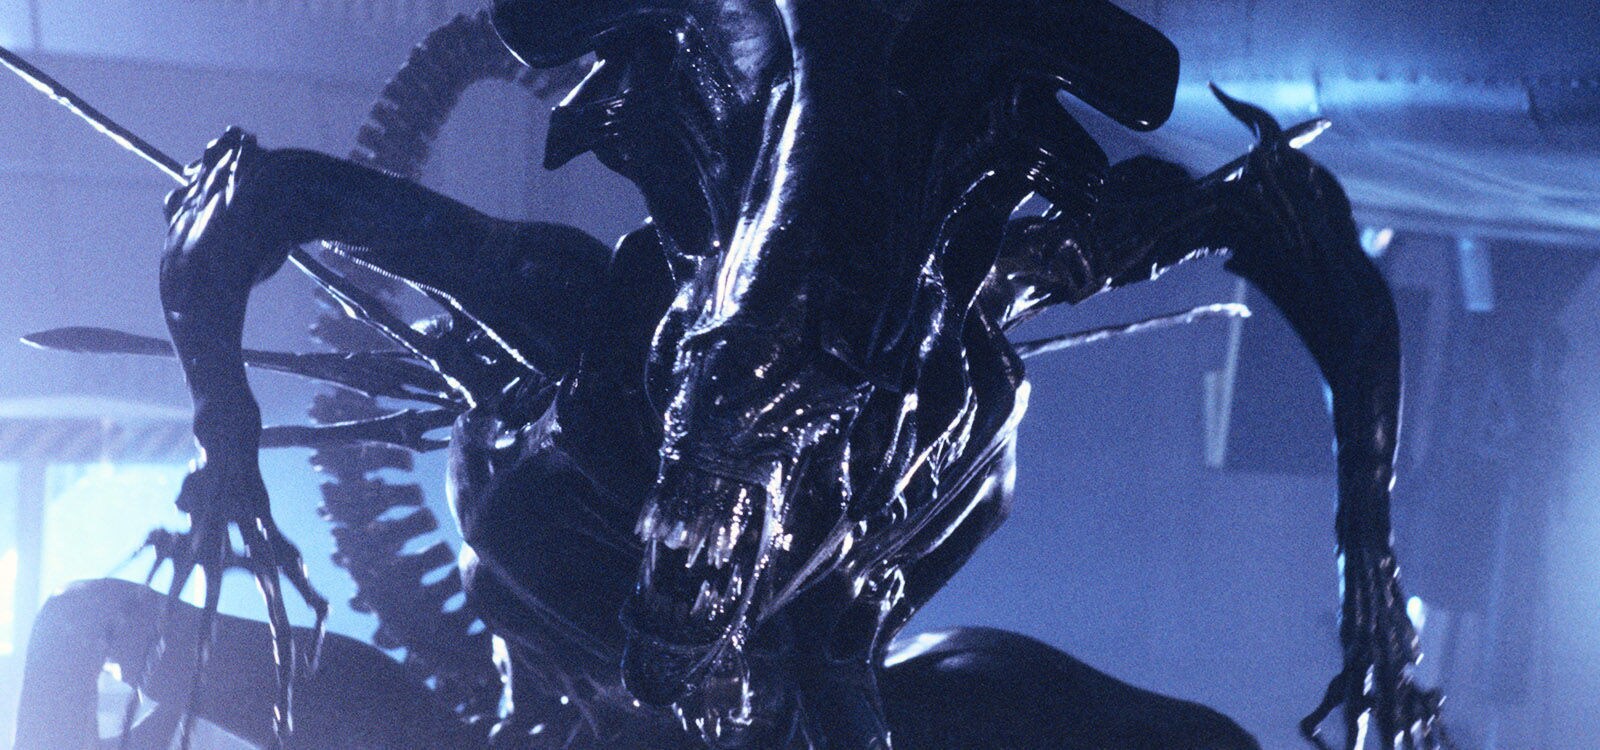 Adult alien from the movie "Aliens"